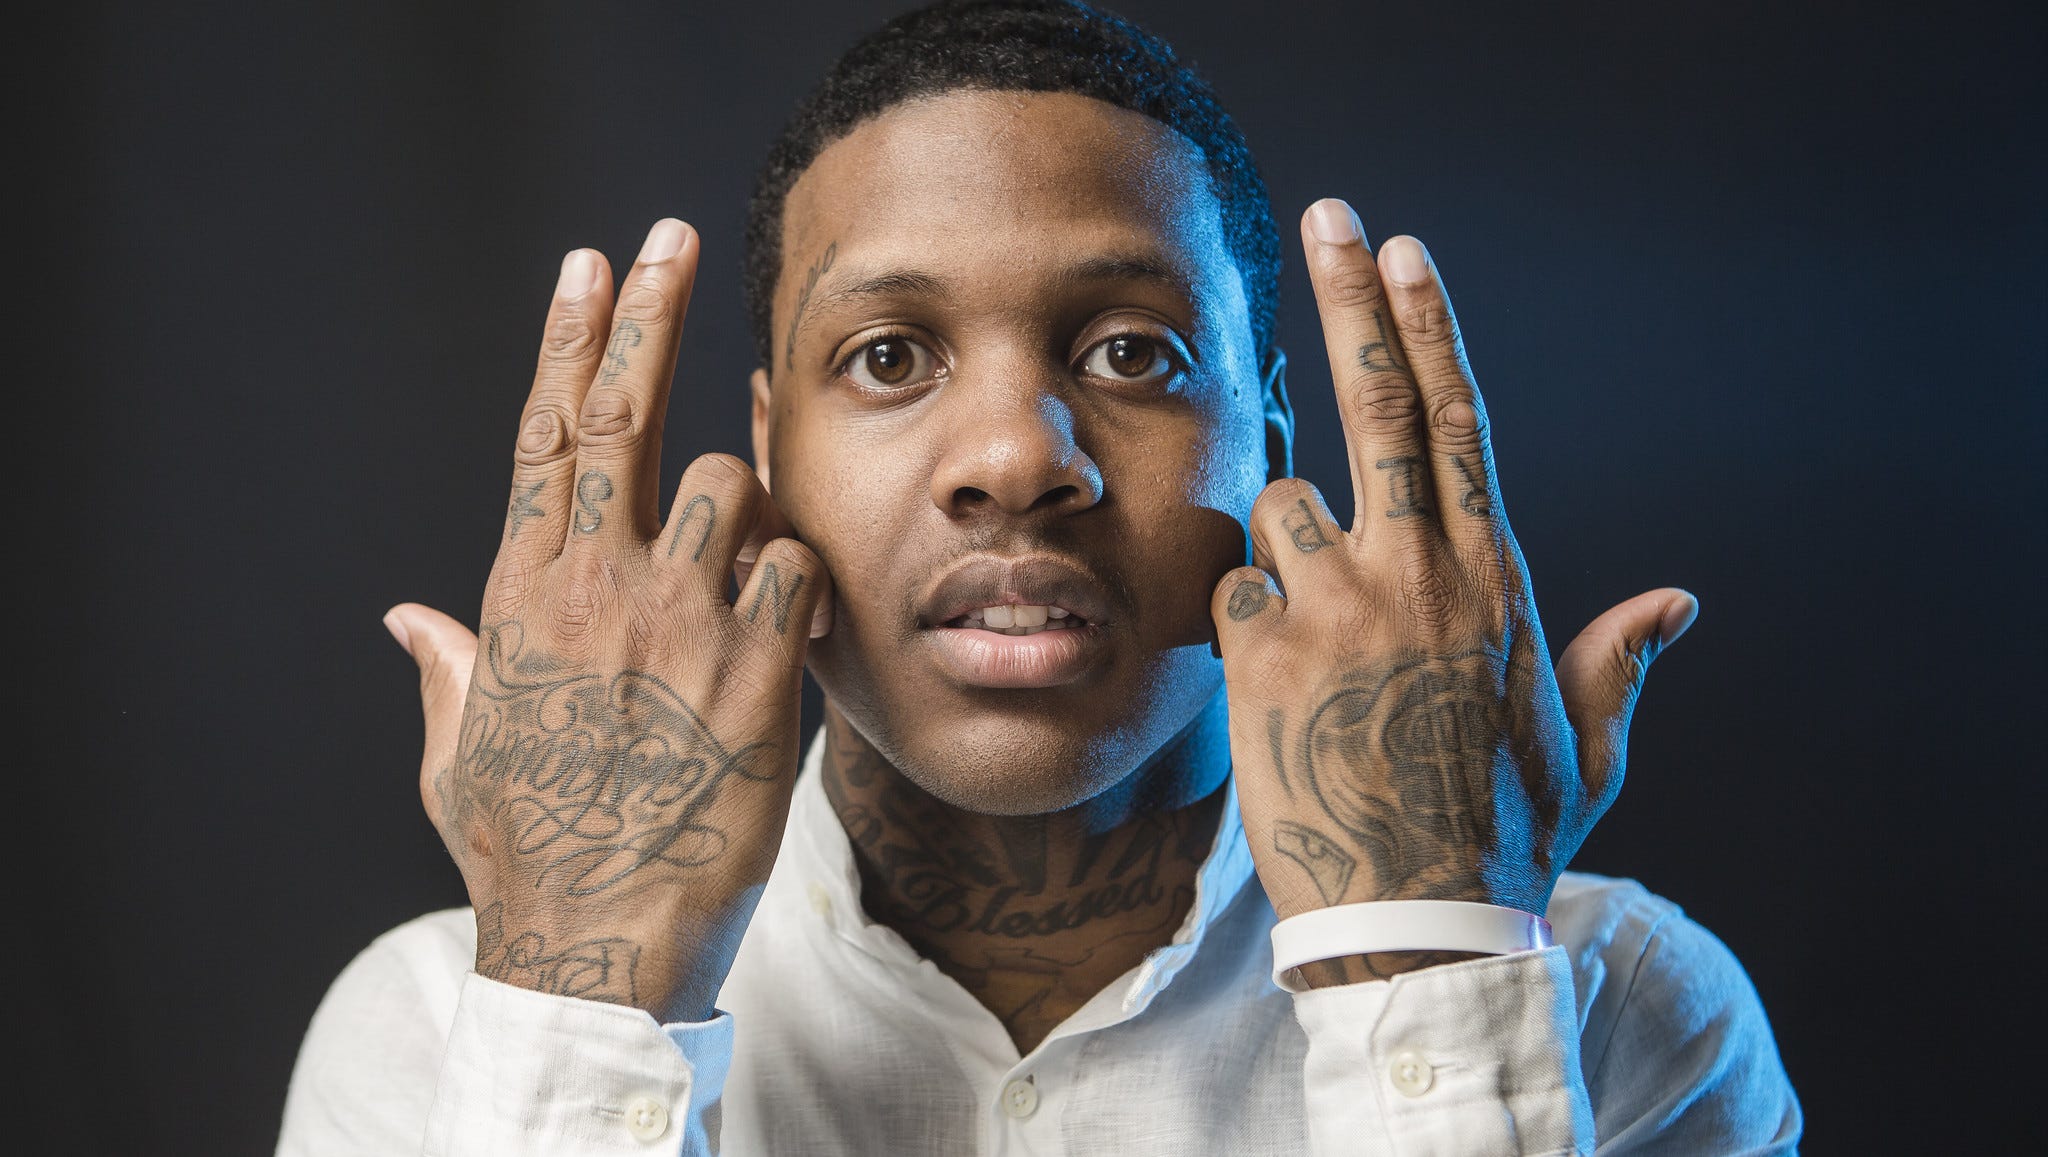 Chicago rapper Lil Durk gets personal on '2X'